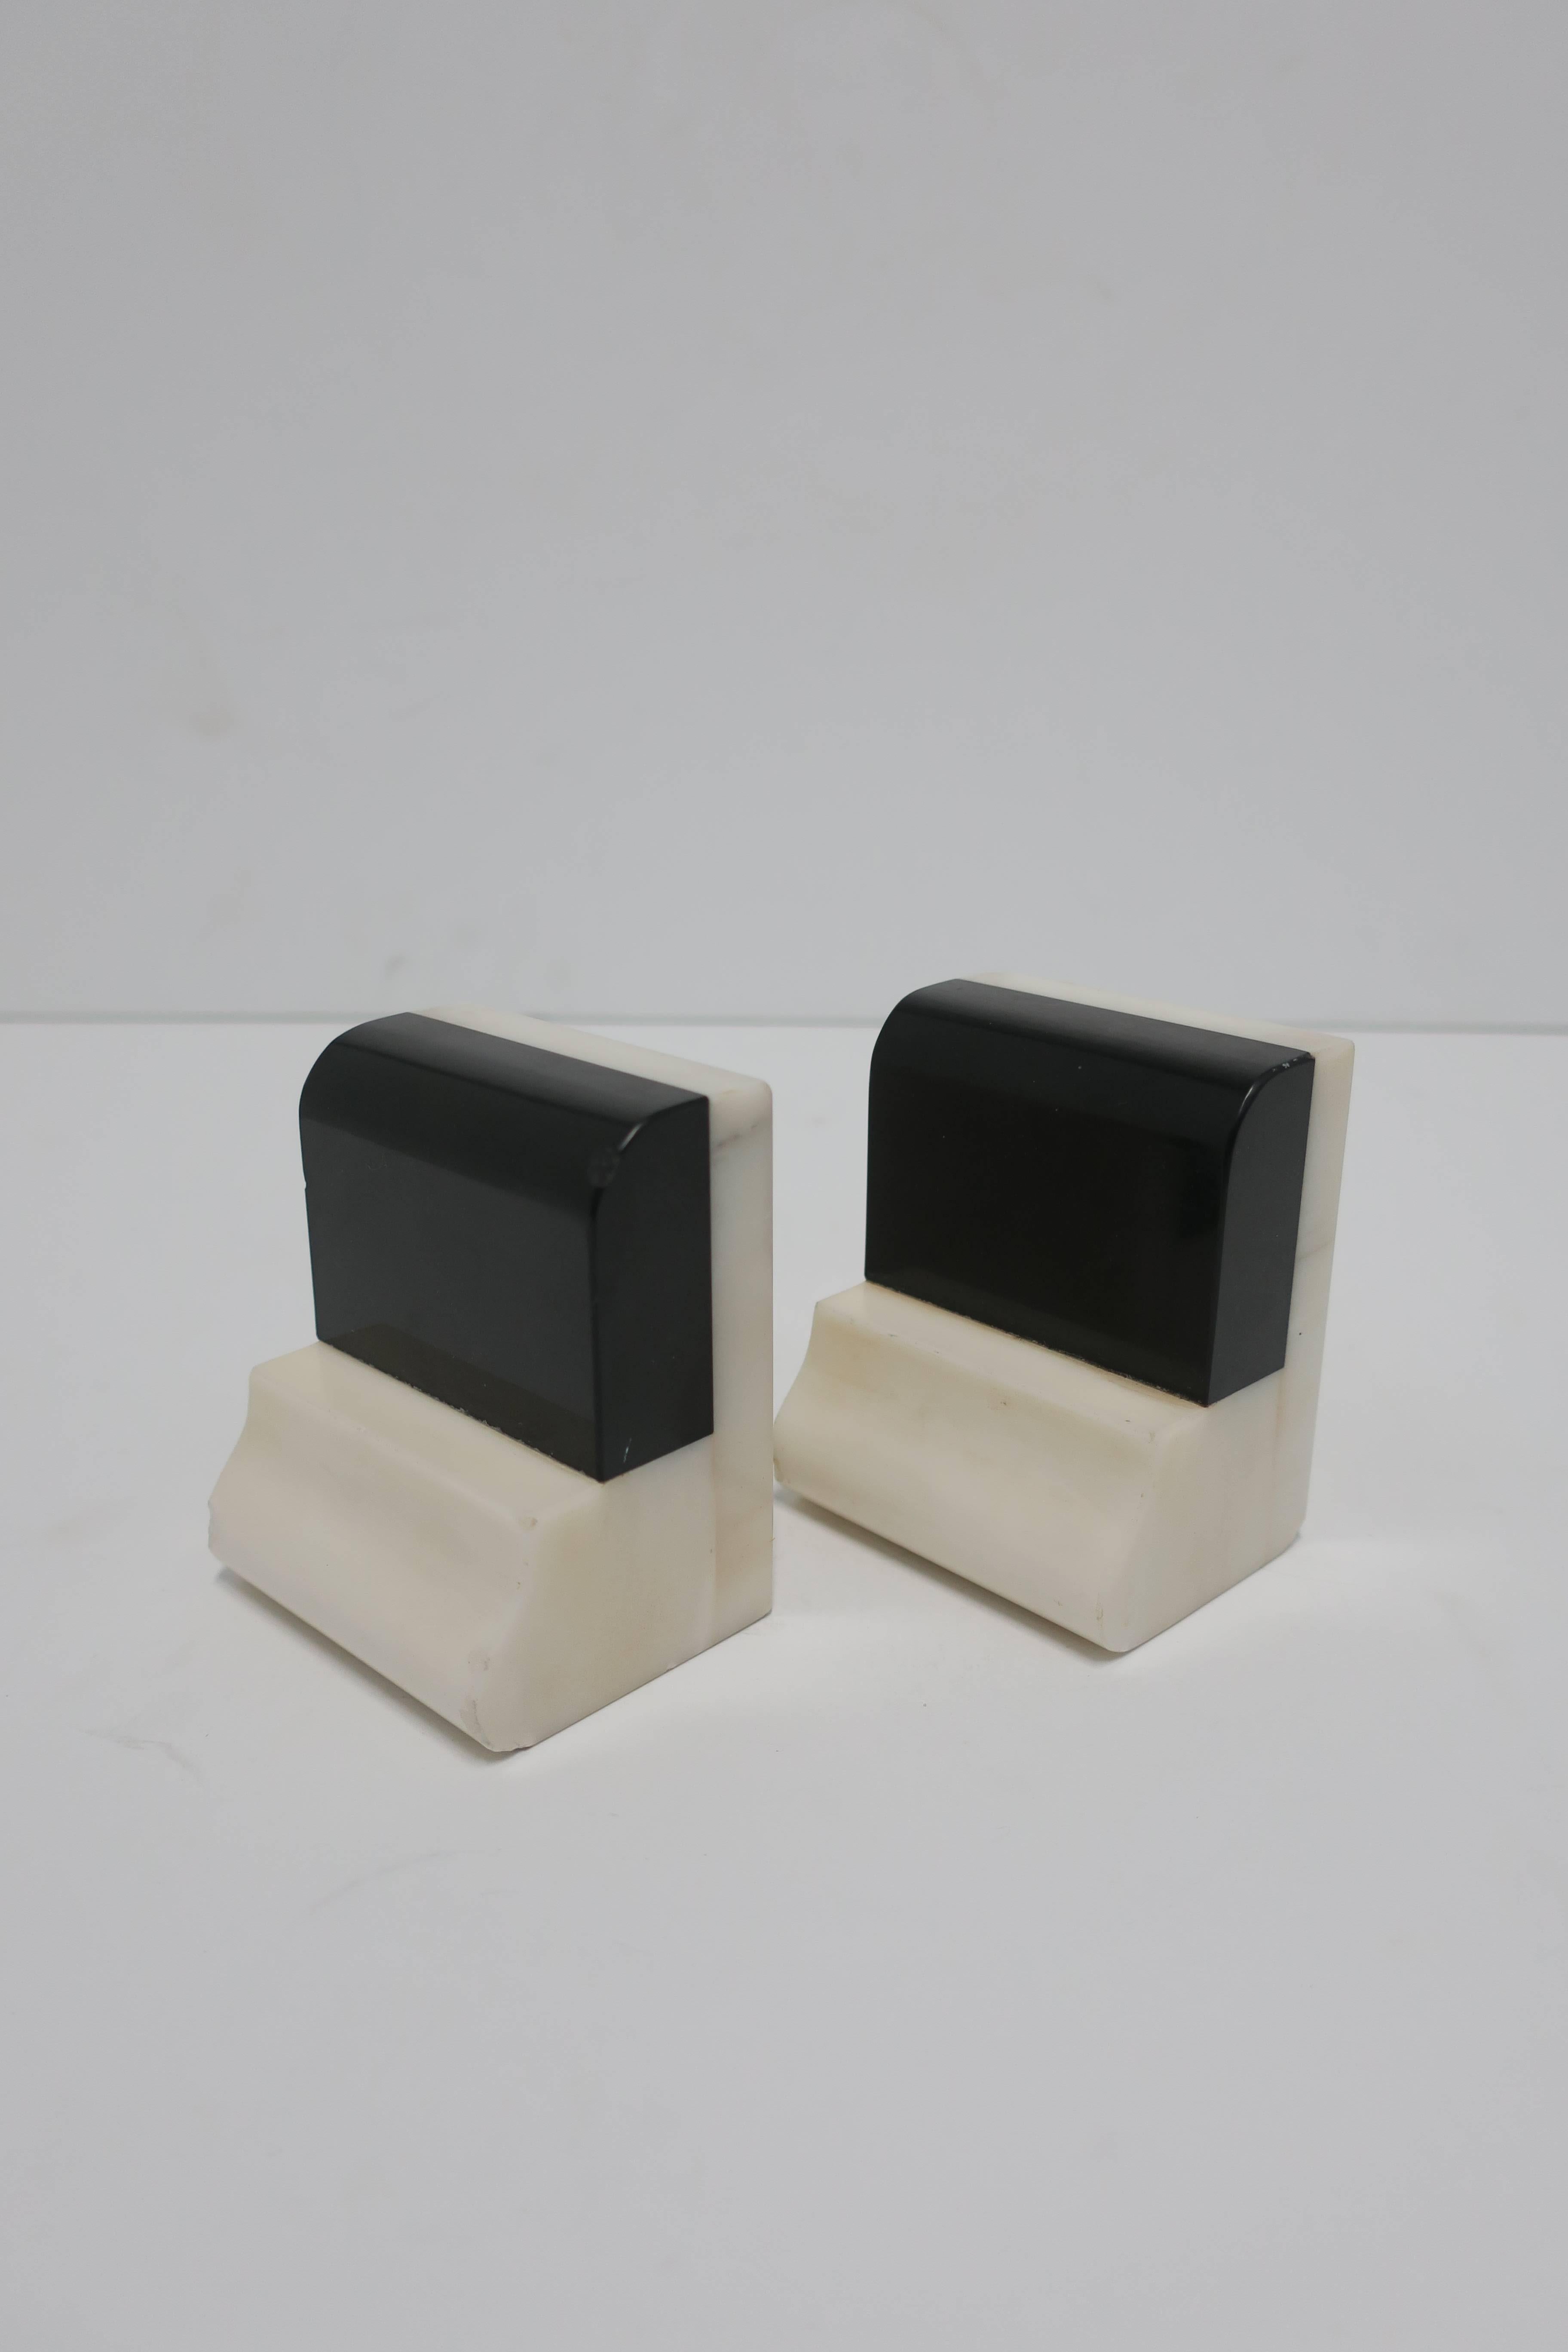 Early 20th Century Pair Art Deco Black and White Marble Bookends